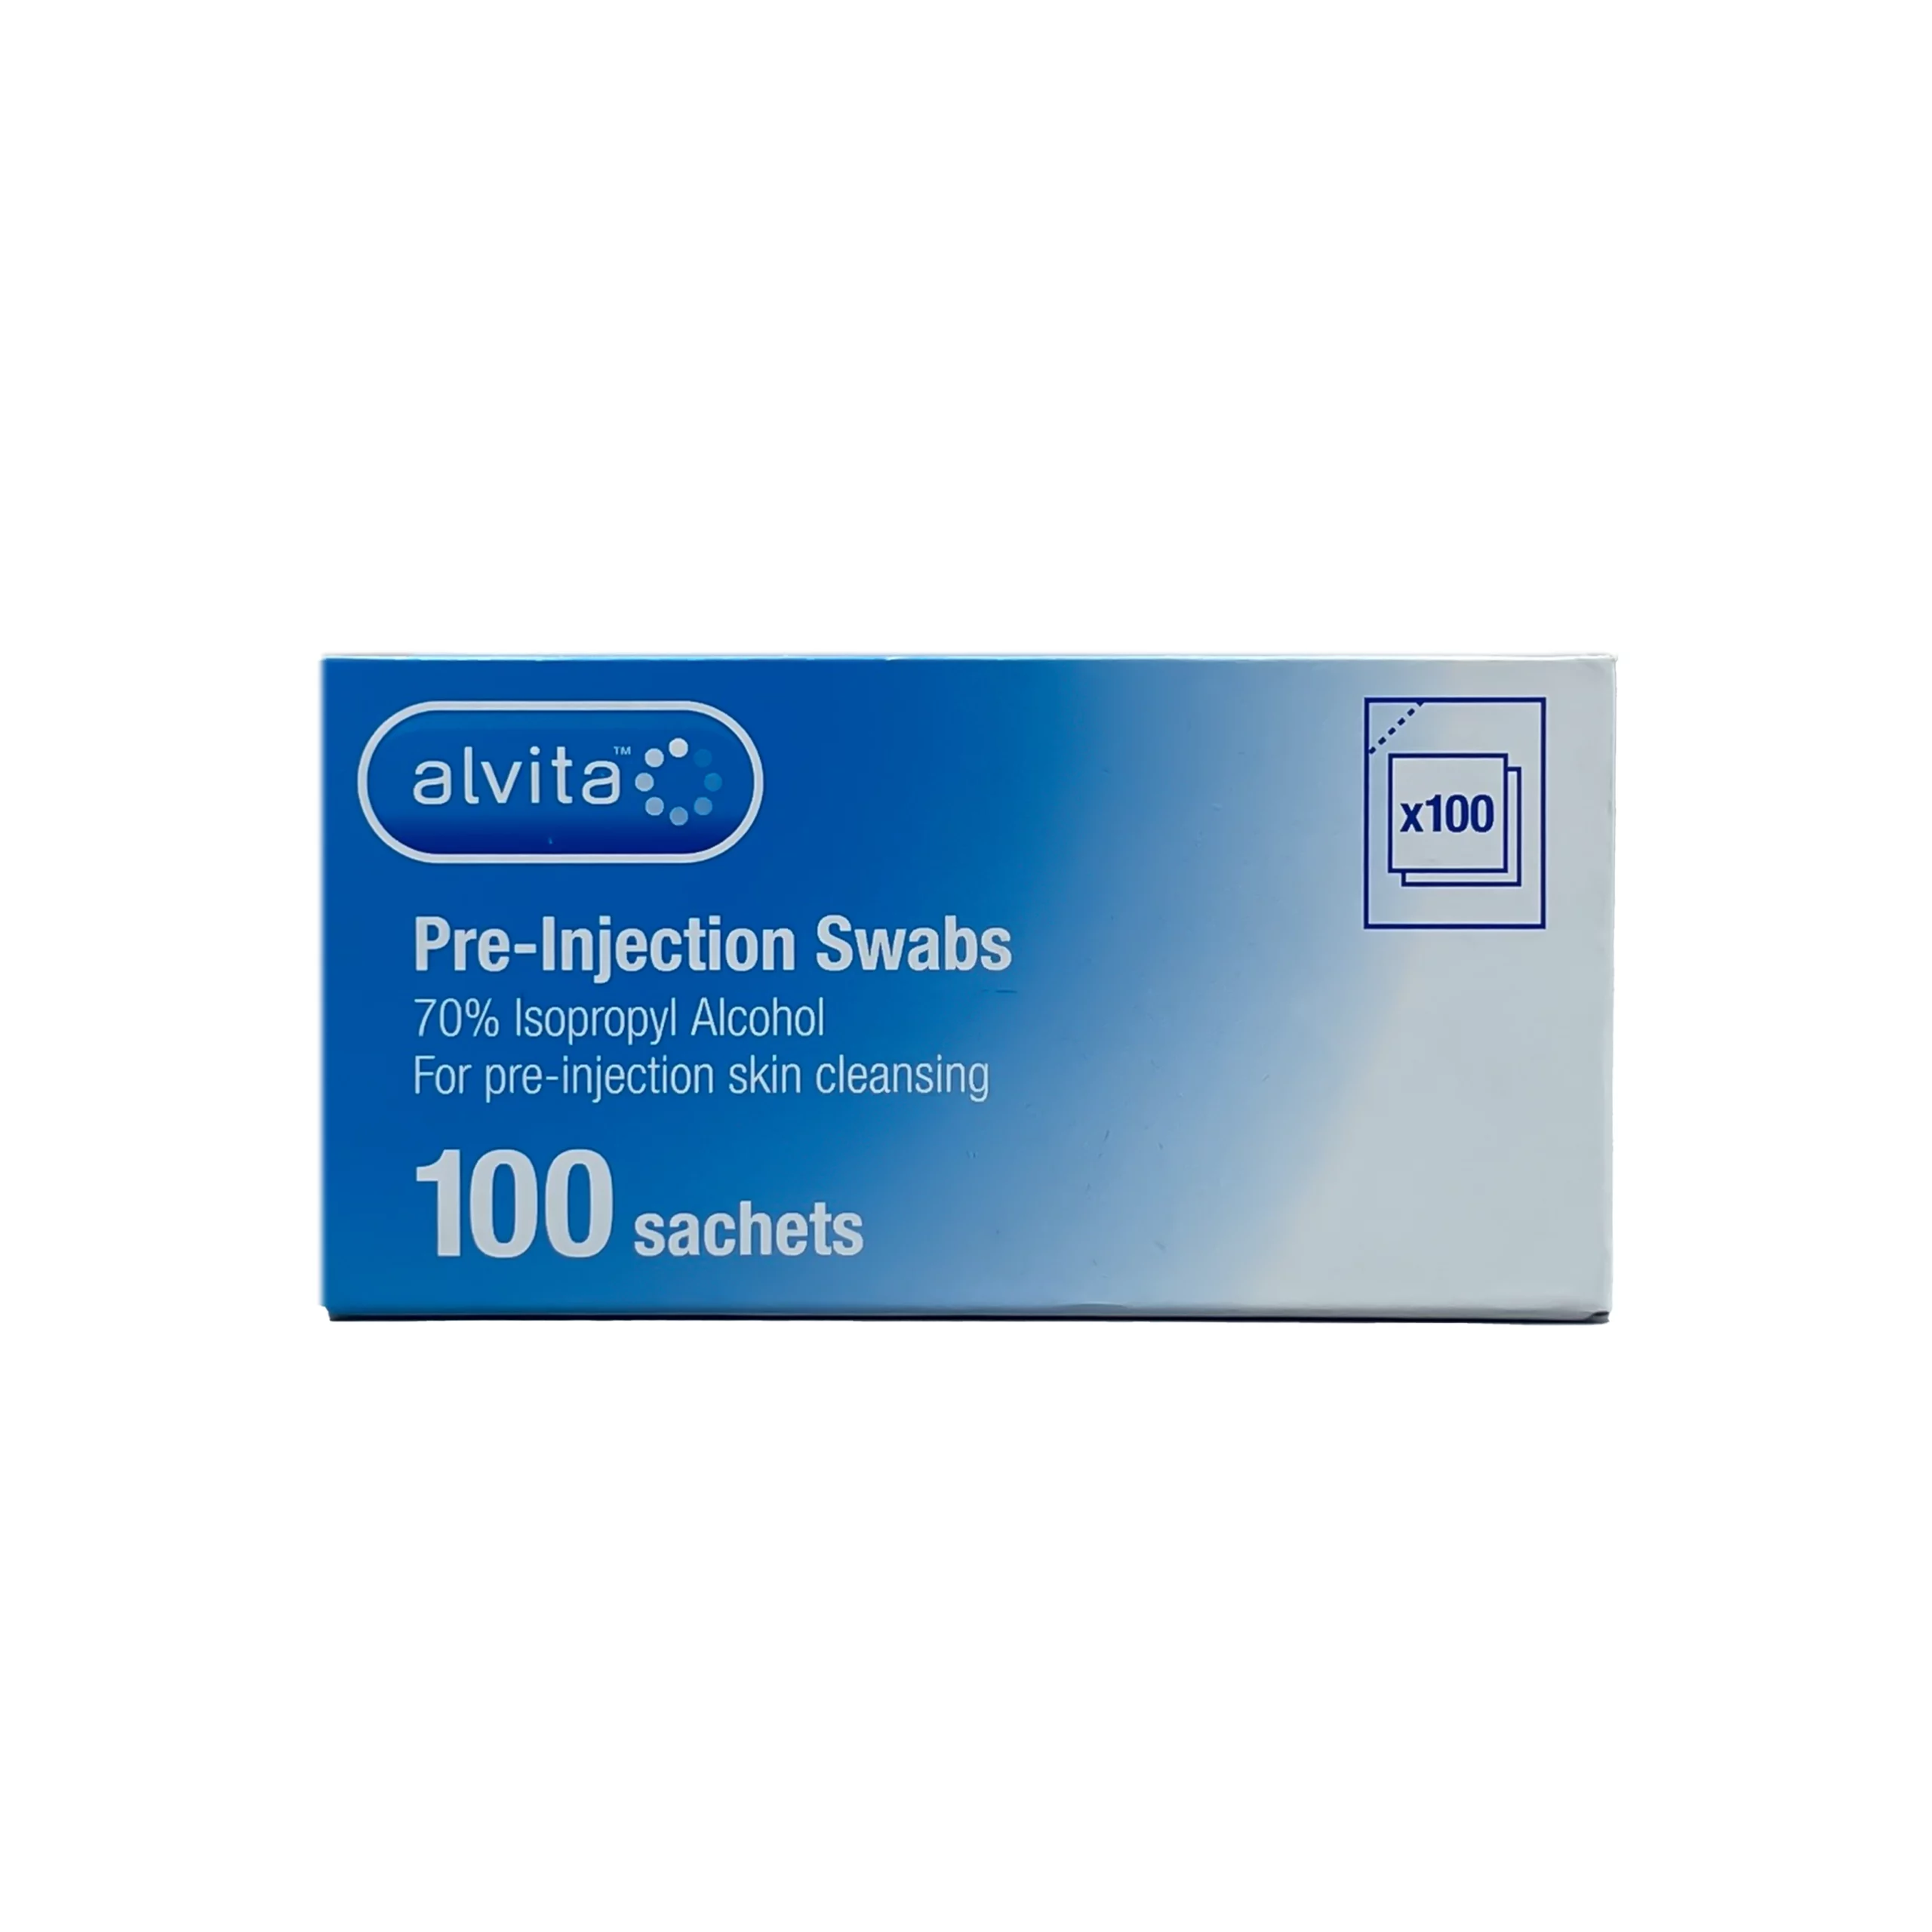 Pre-injection Swabs (70% Isopropyl Alcohol)